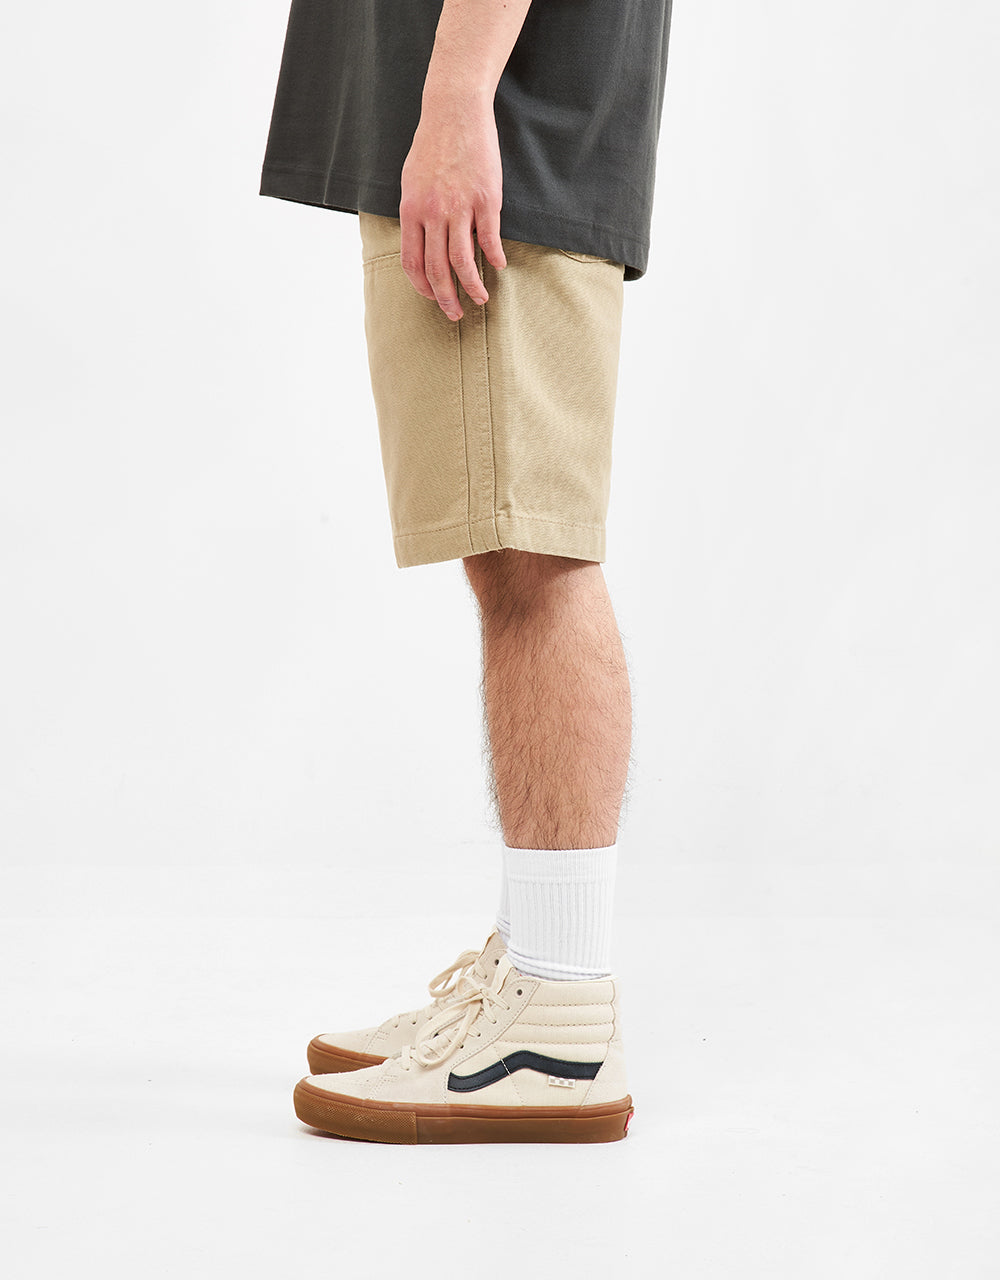 Dickies Duck Canvas Chap Short - Stone Washed Desert Sand